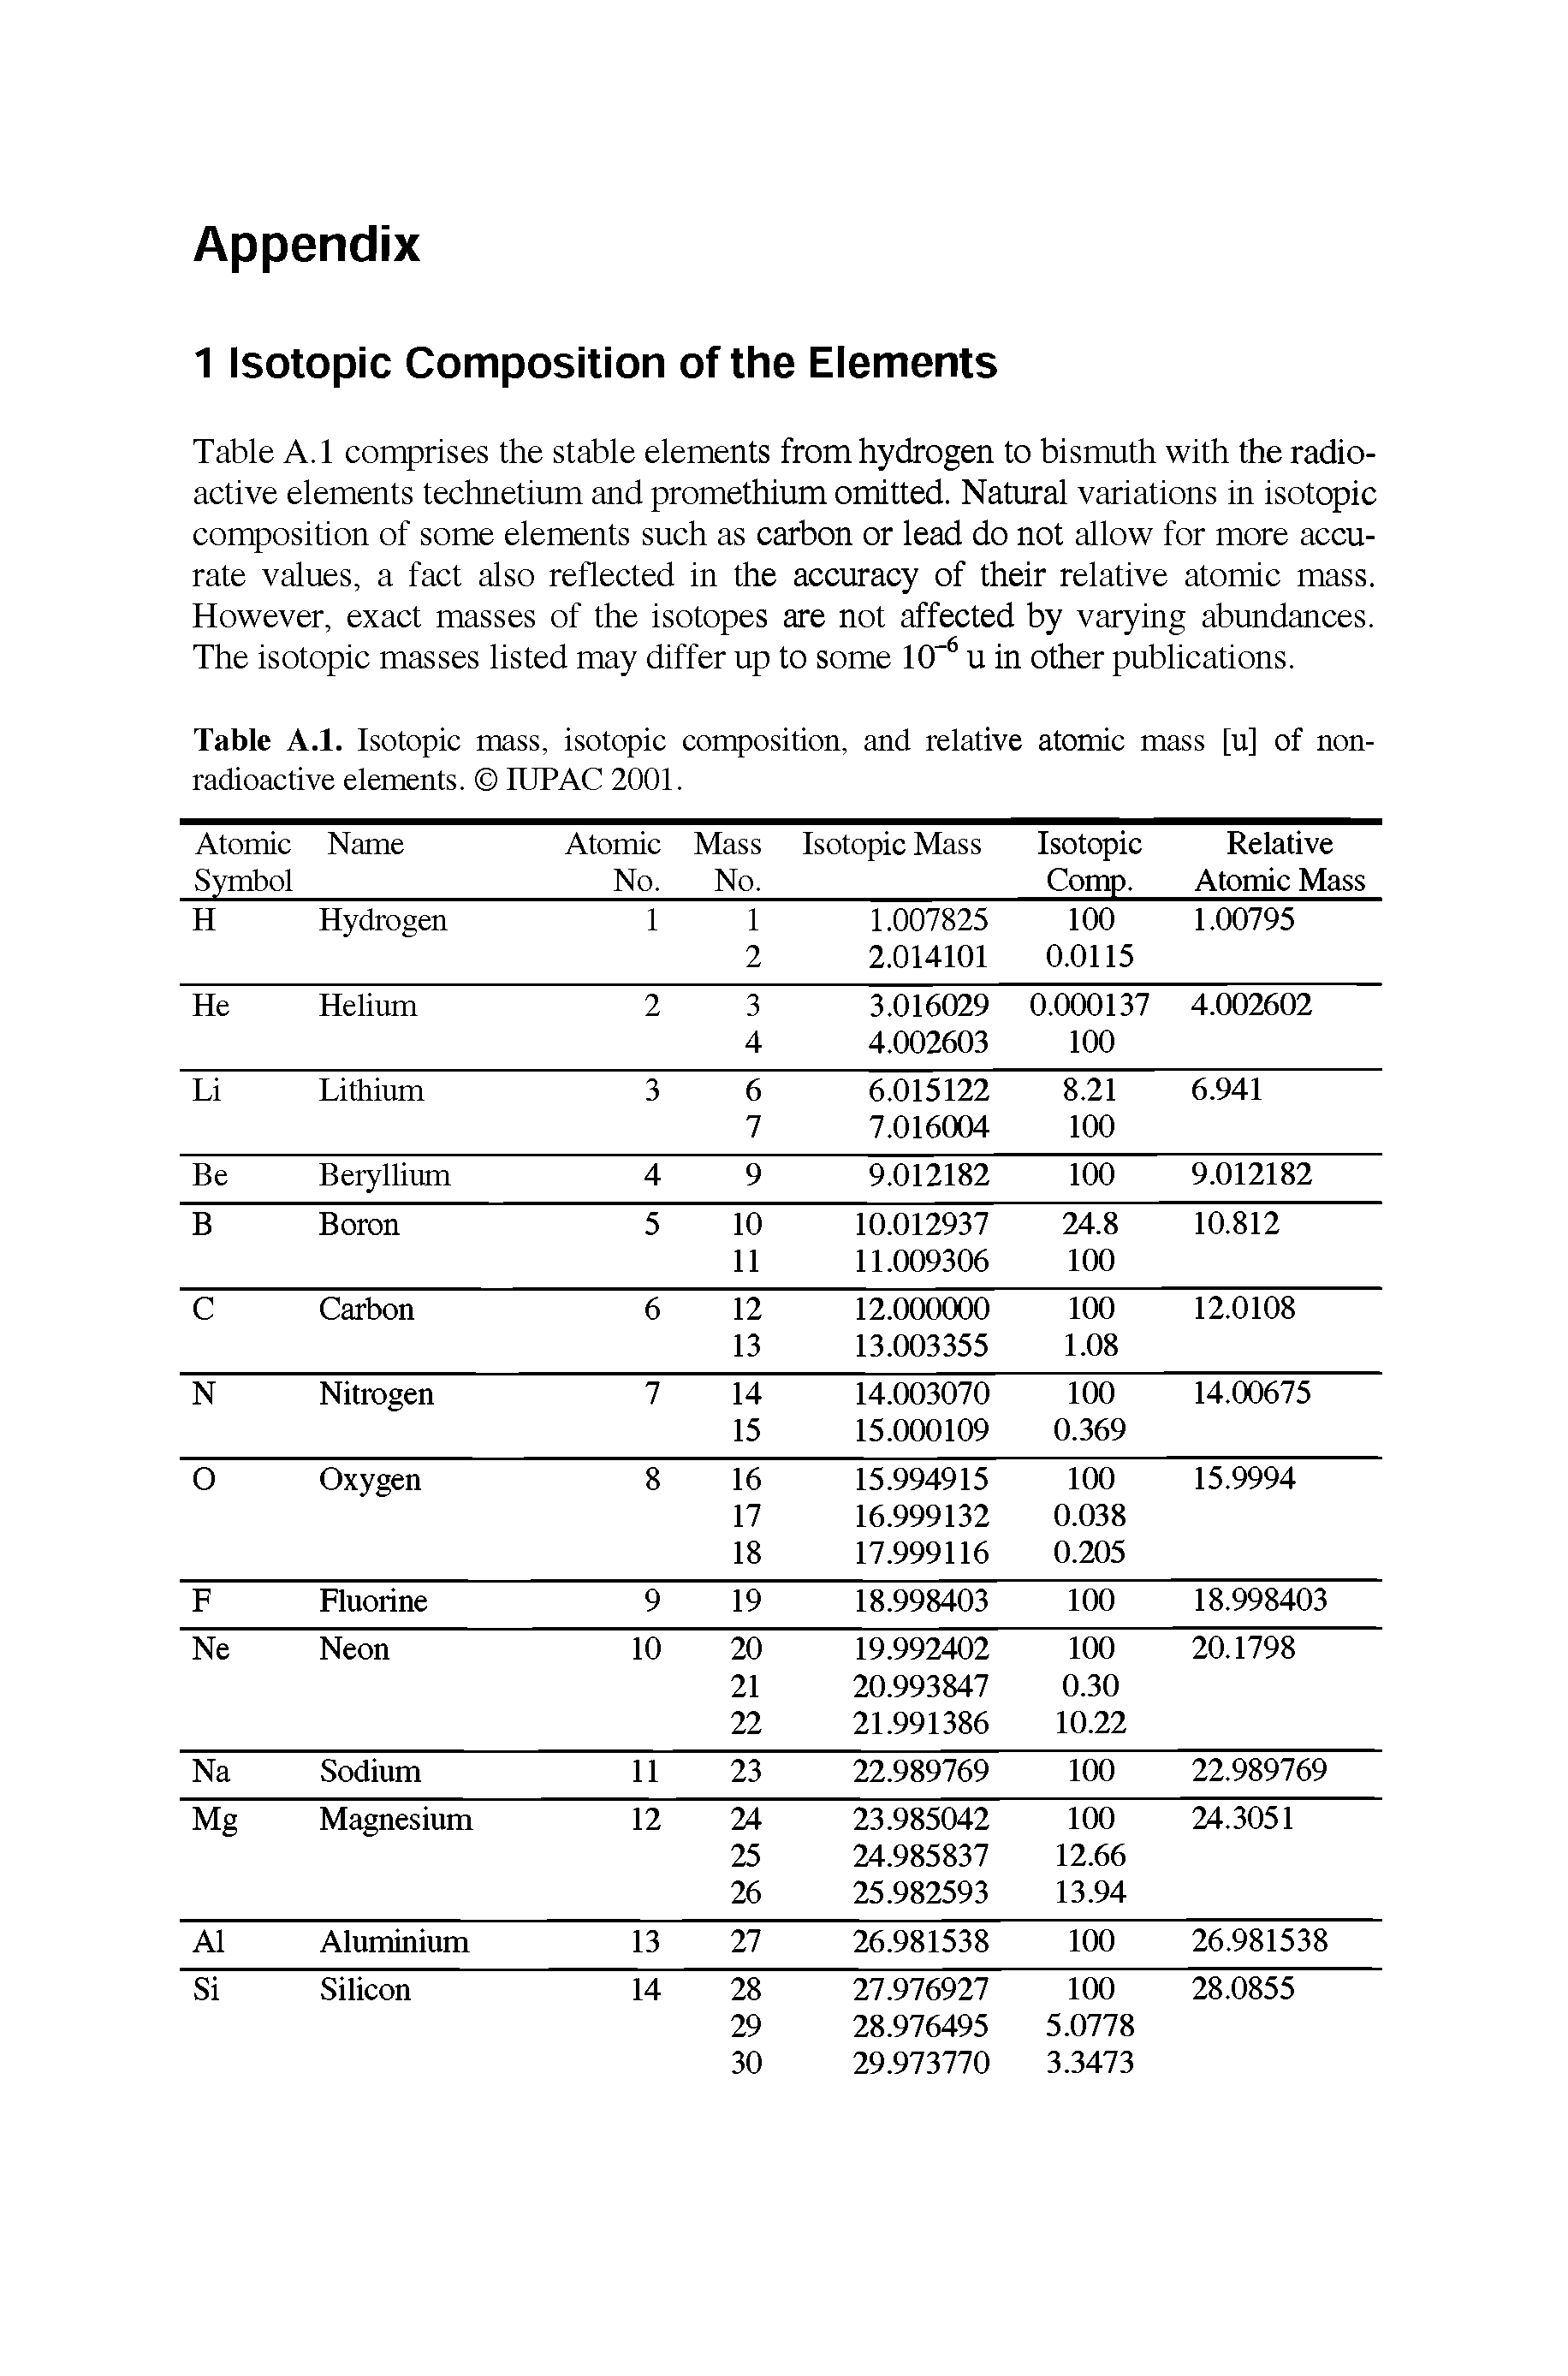 Table A. 1 comprises the stable elements from hydrogen to bismuth with the radioactive elements technetium and promethium omitted. Natural variations in isotopic composition of some elements such as carbon or lead do not allow for more accurate values, a fact also reflected in the accuracy of their relative atomic mass. However, exact masses of the isotopes are not affected by varying abundances. The isotopic masses listed may differ up to some 10 u in other publications.